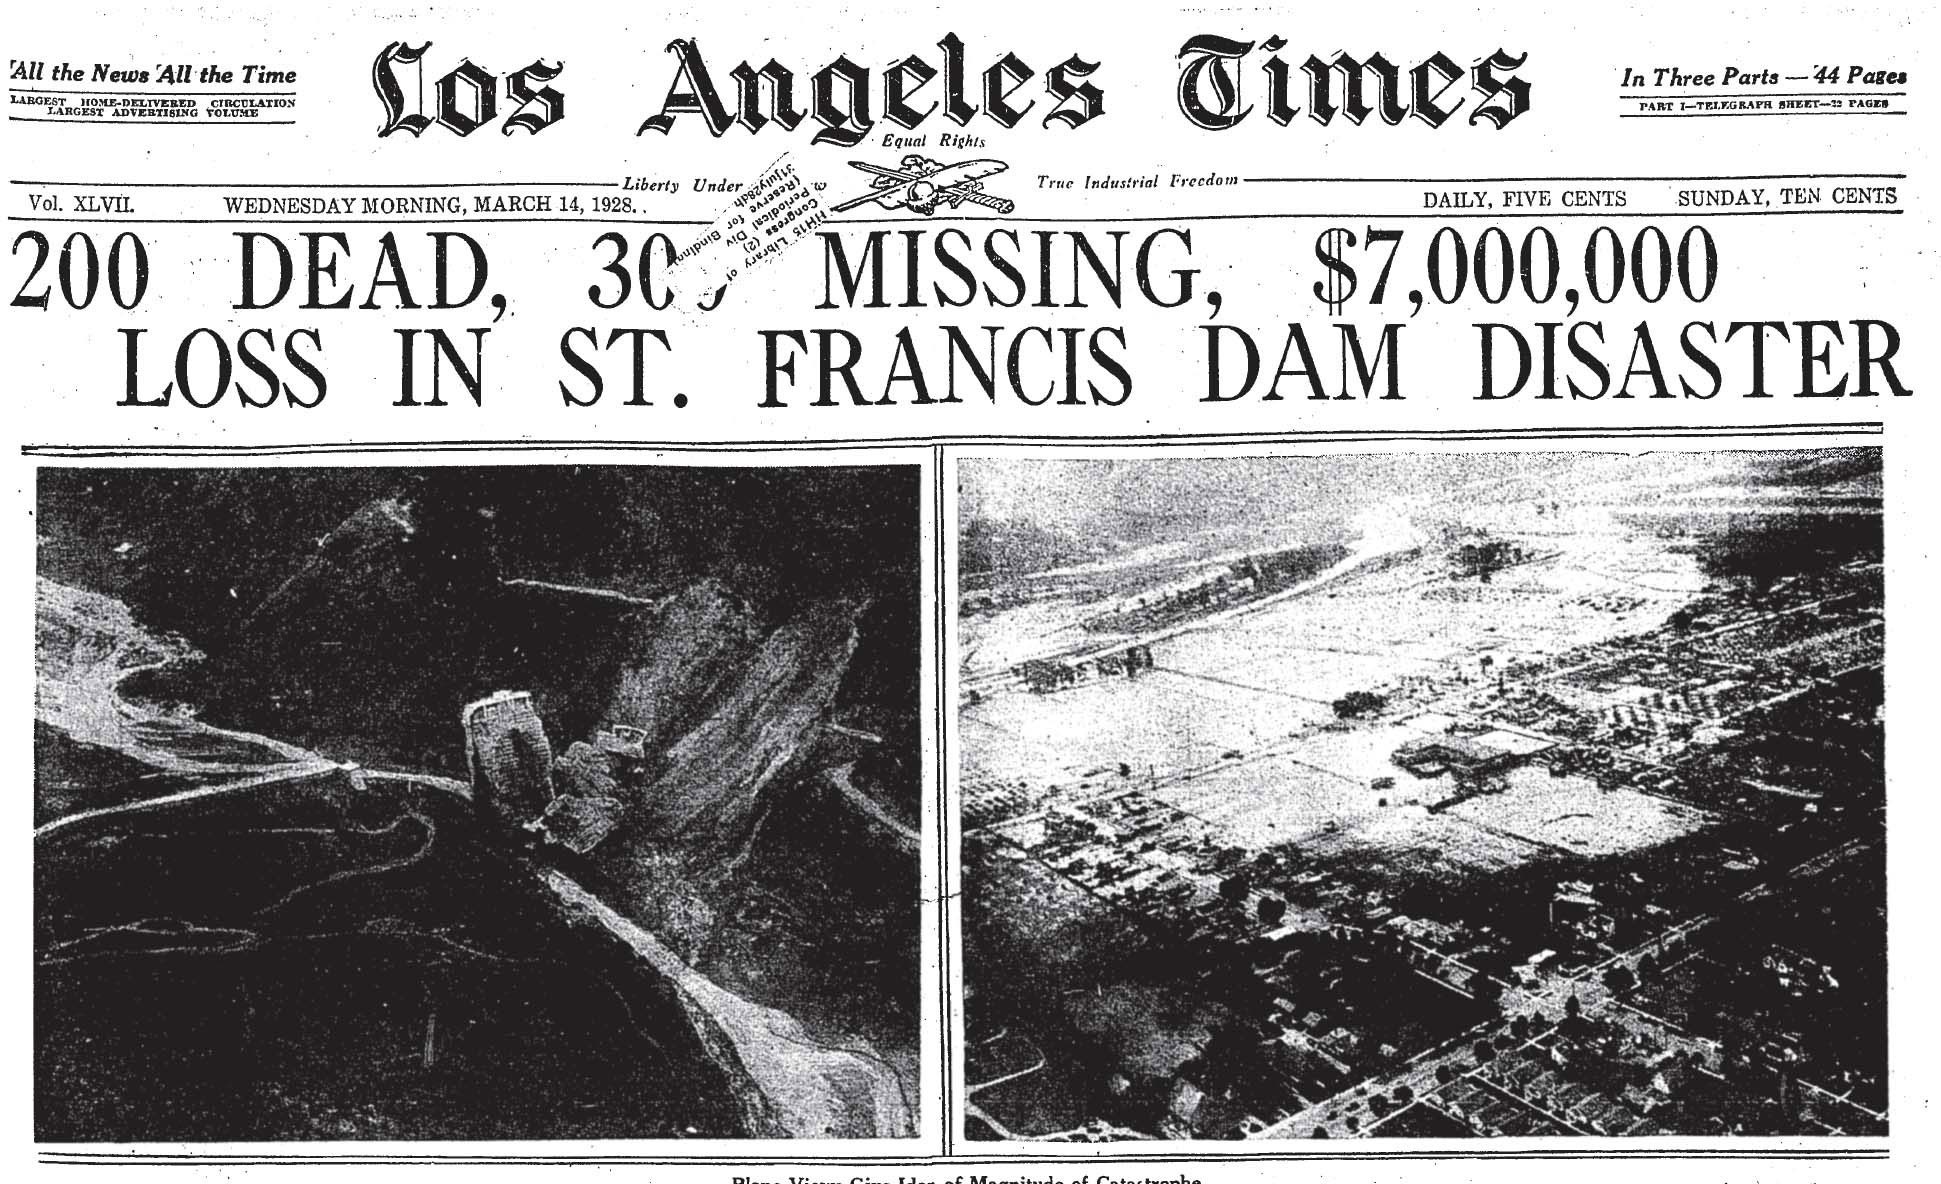 Dams & Disasters: An Historic Overview of California Dams and their Risks